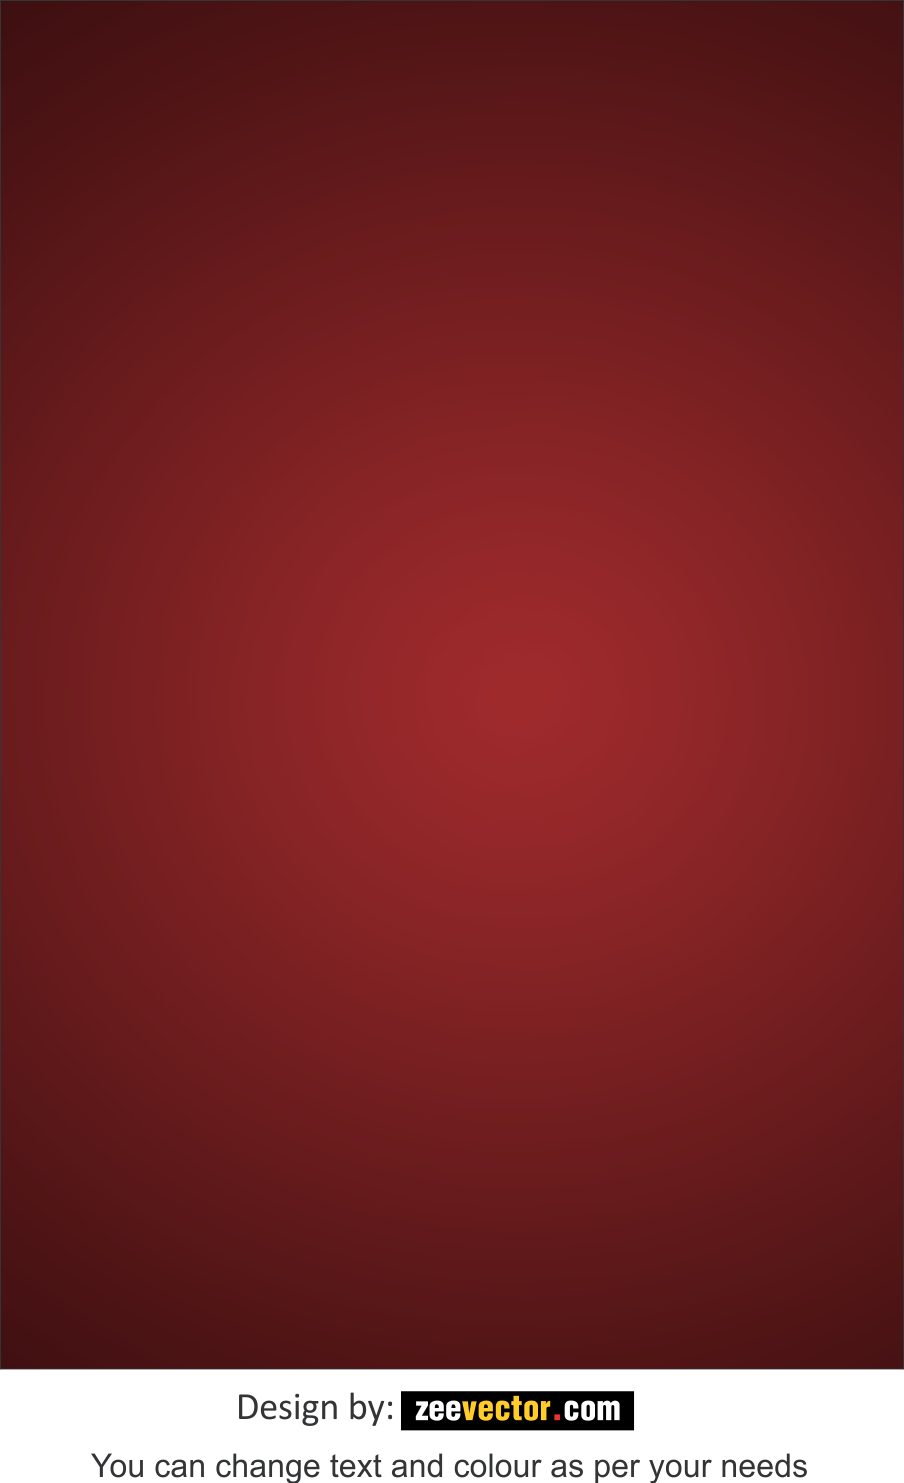 Red Black Background HD - FREE Vector Design - Cdr, Ai, EPS, PNG, SVG